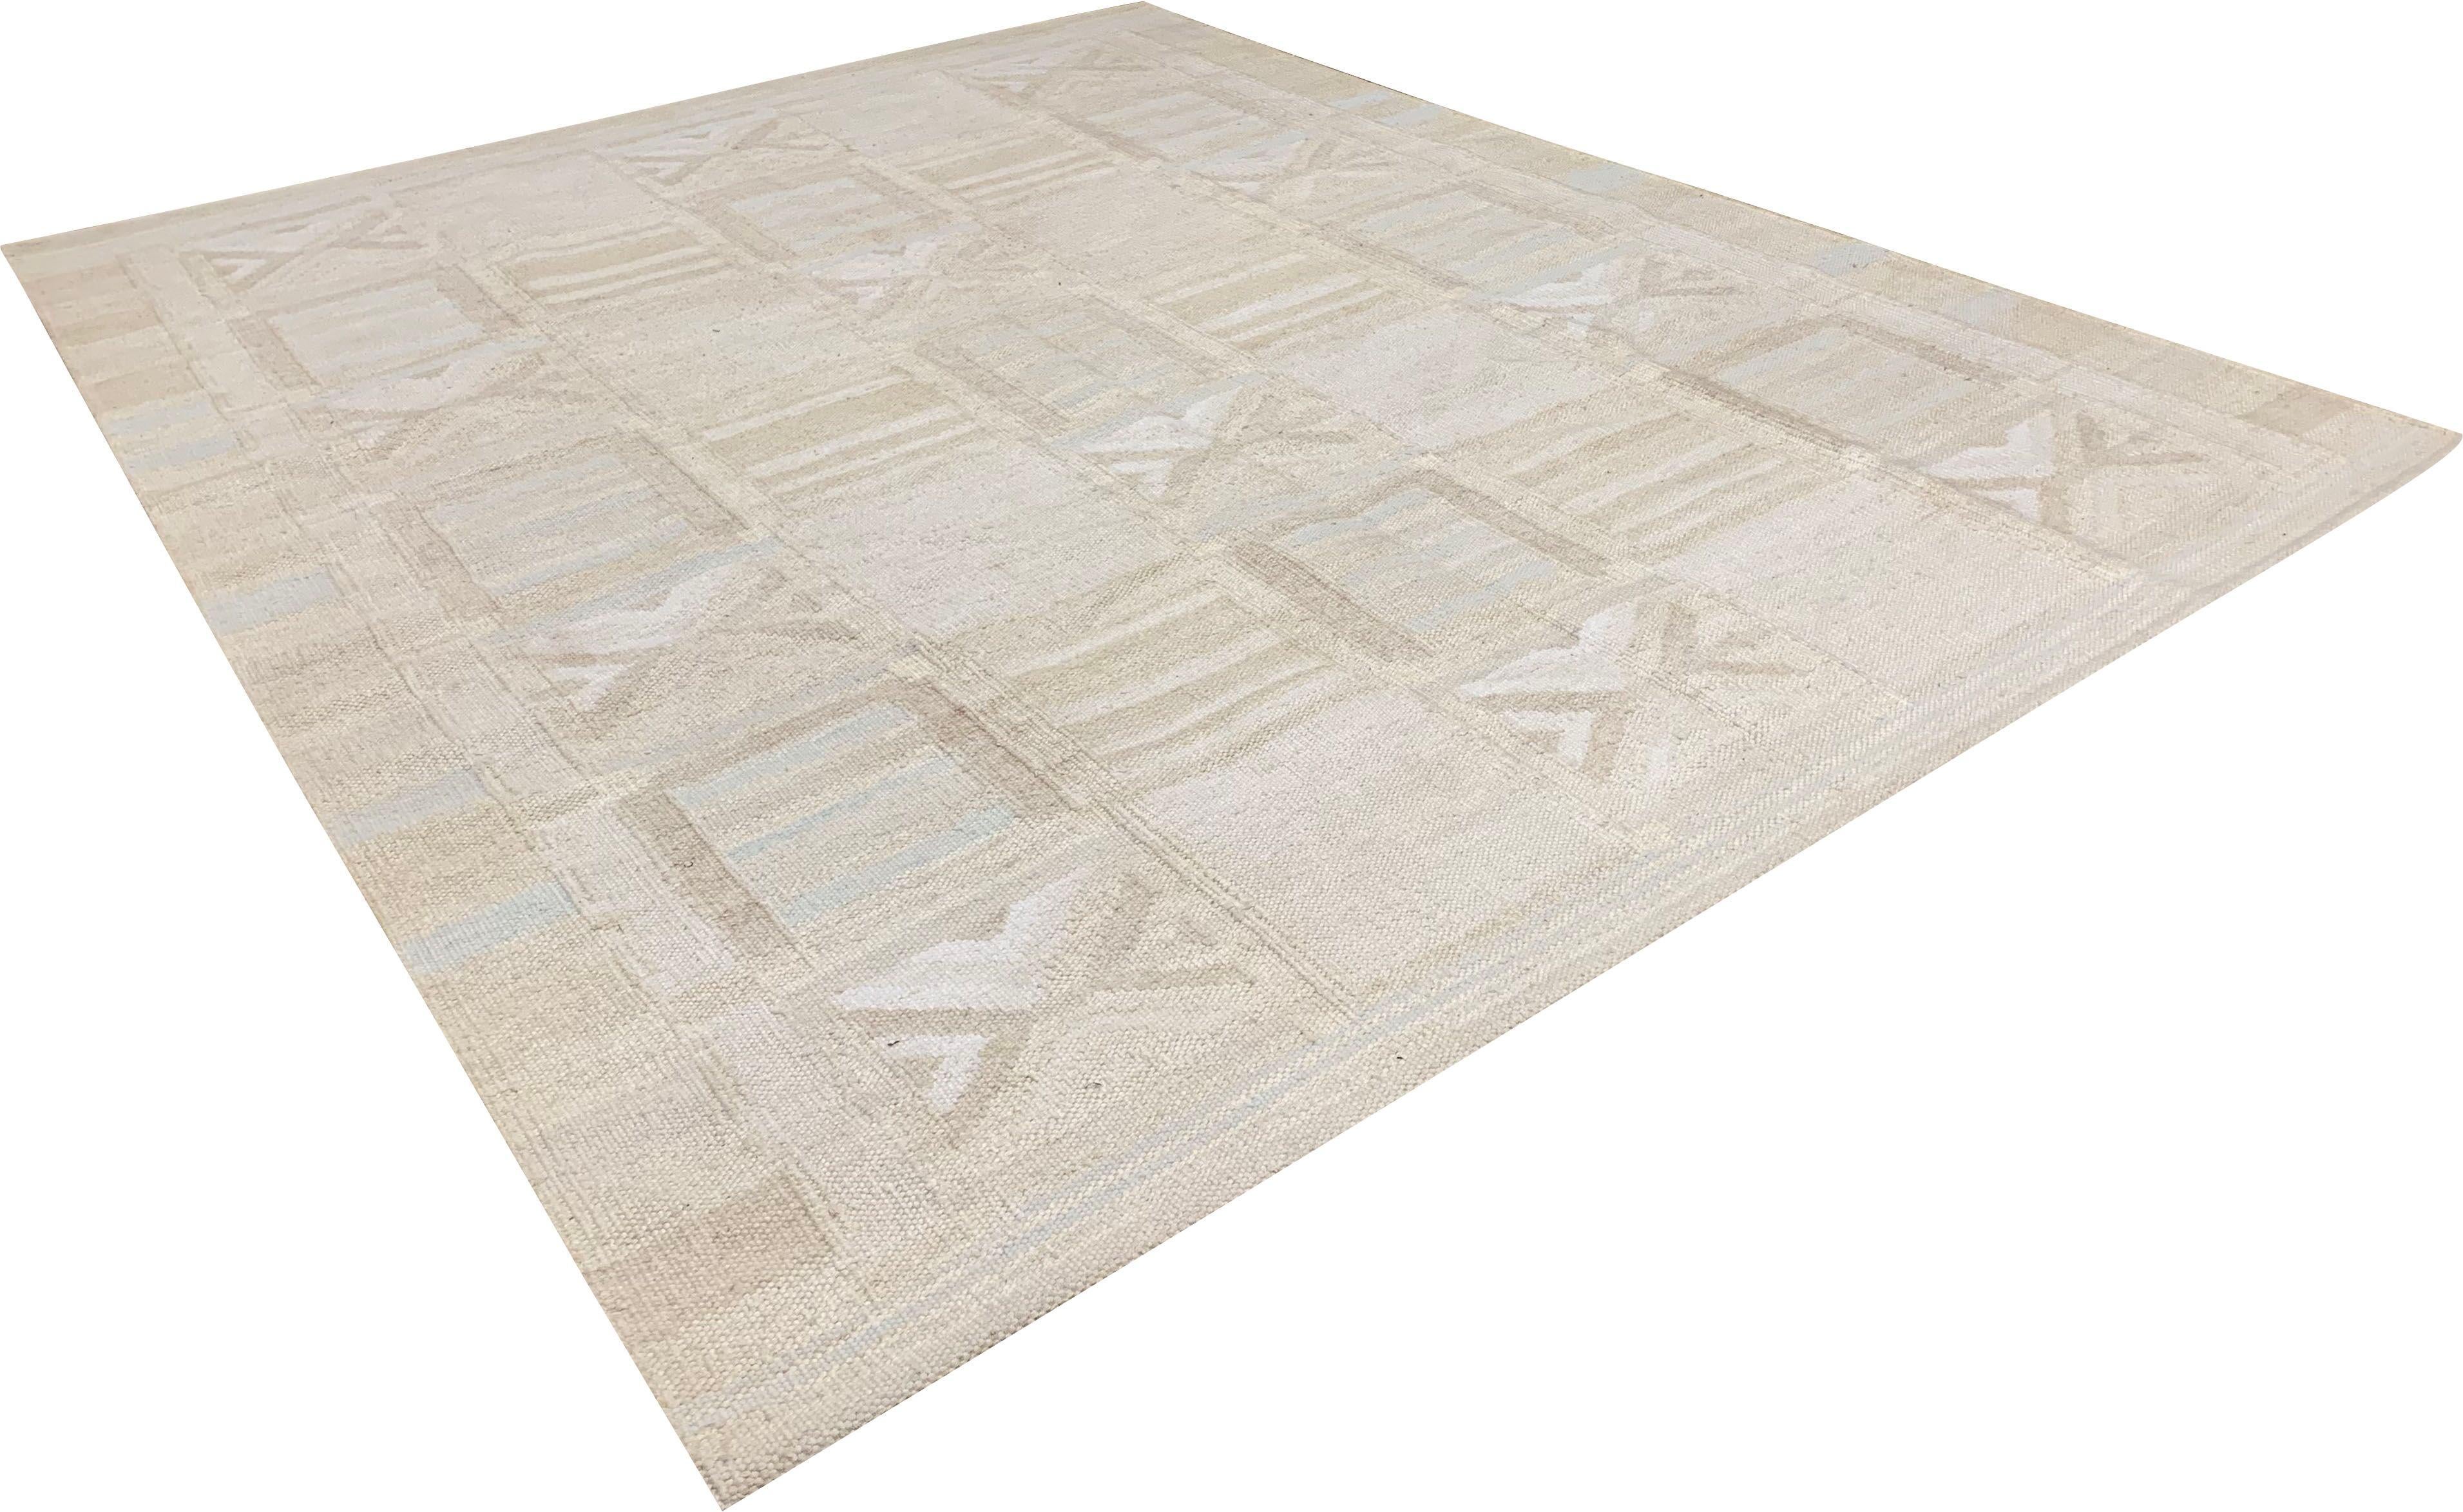 Scandinavian Swedish Style Flatweave  Deco rug, 8' x 10'. Handwoven in India using a combination of wool & viscose this Kilim has been styled on the clean and simple look of Swedish designs to create a rug that has a simplicity and boldness that